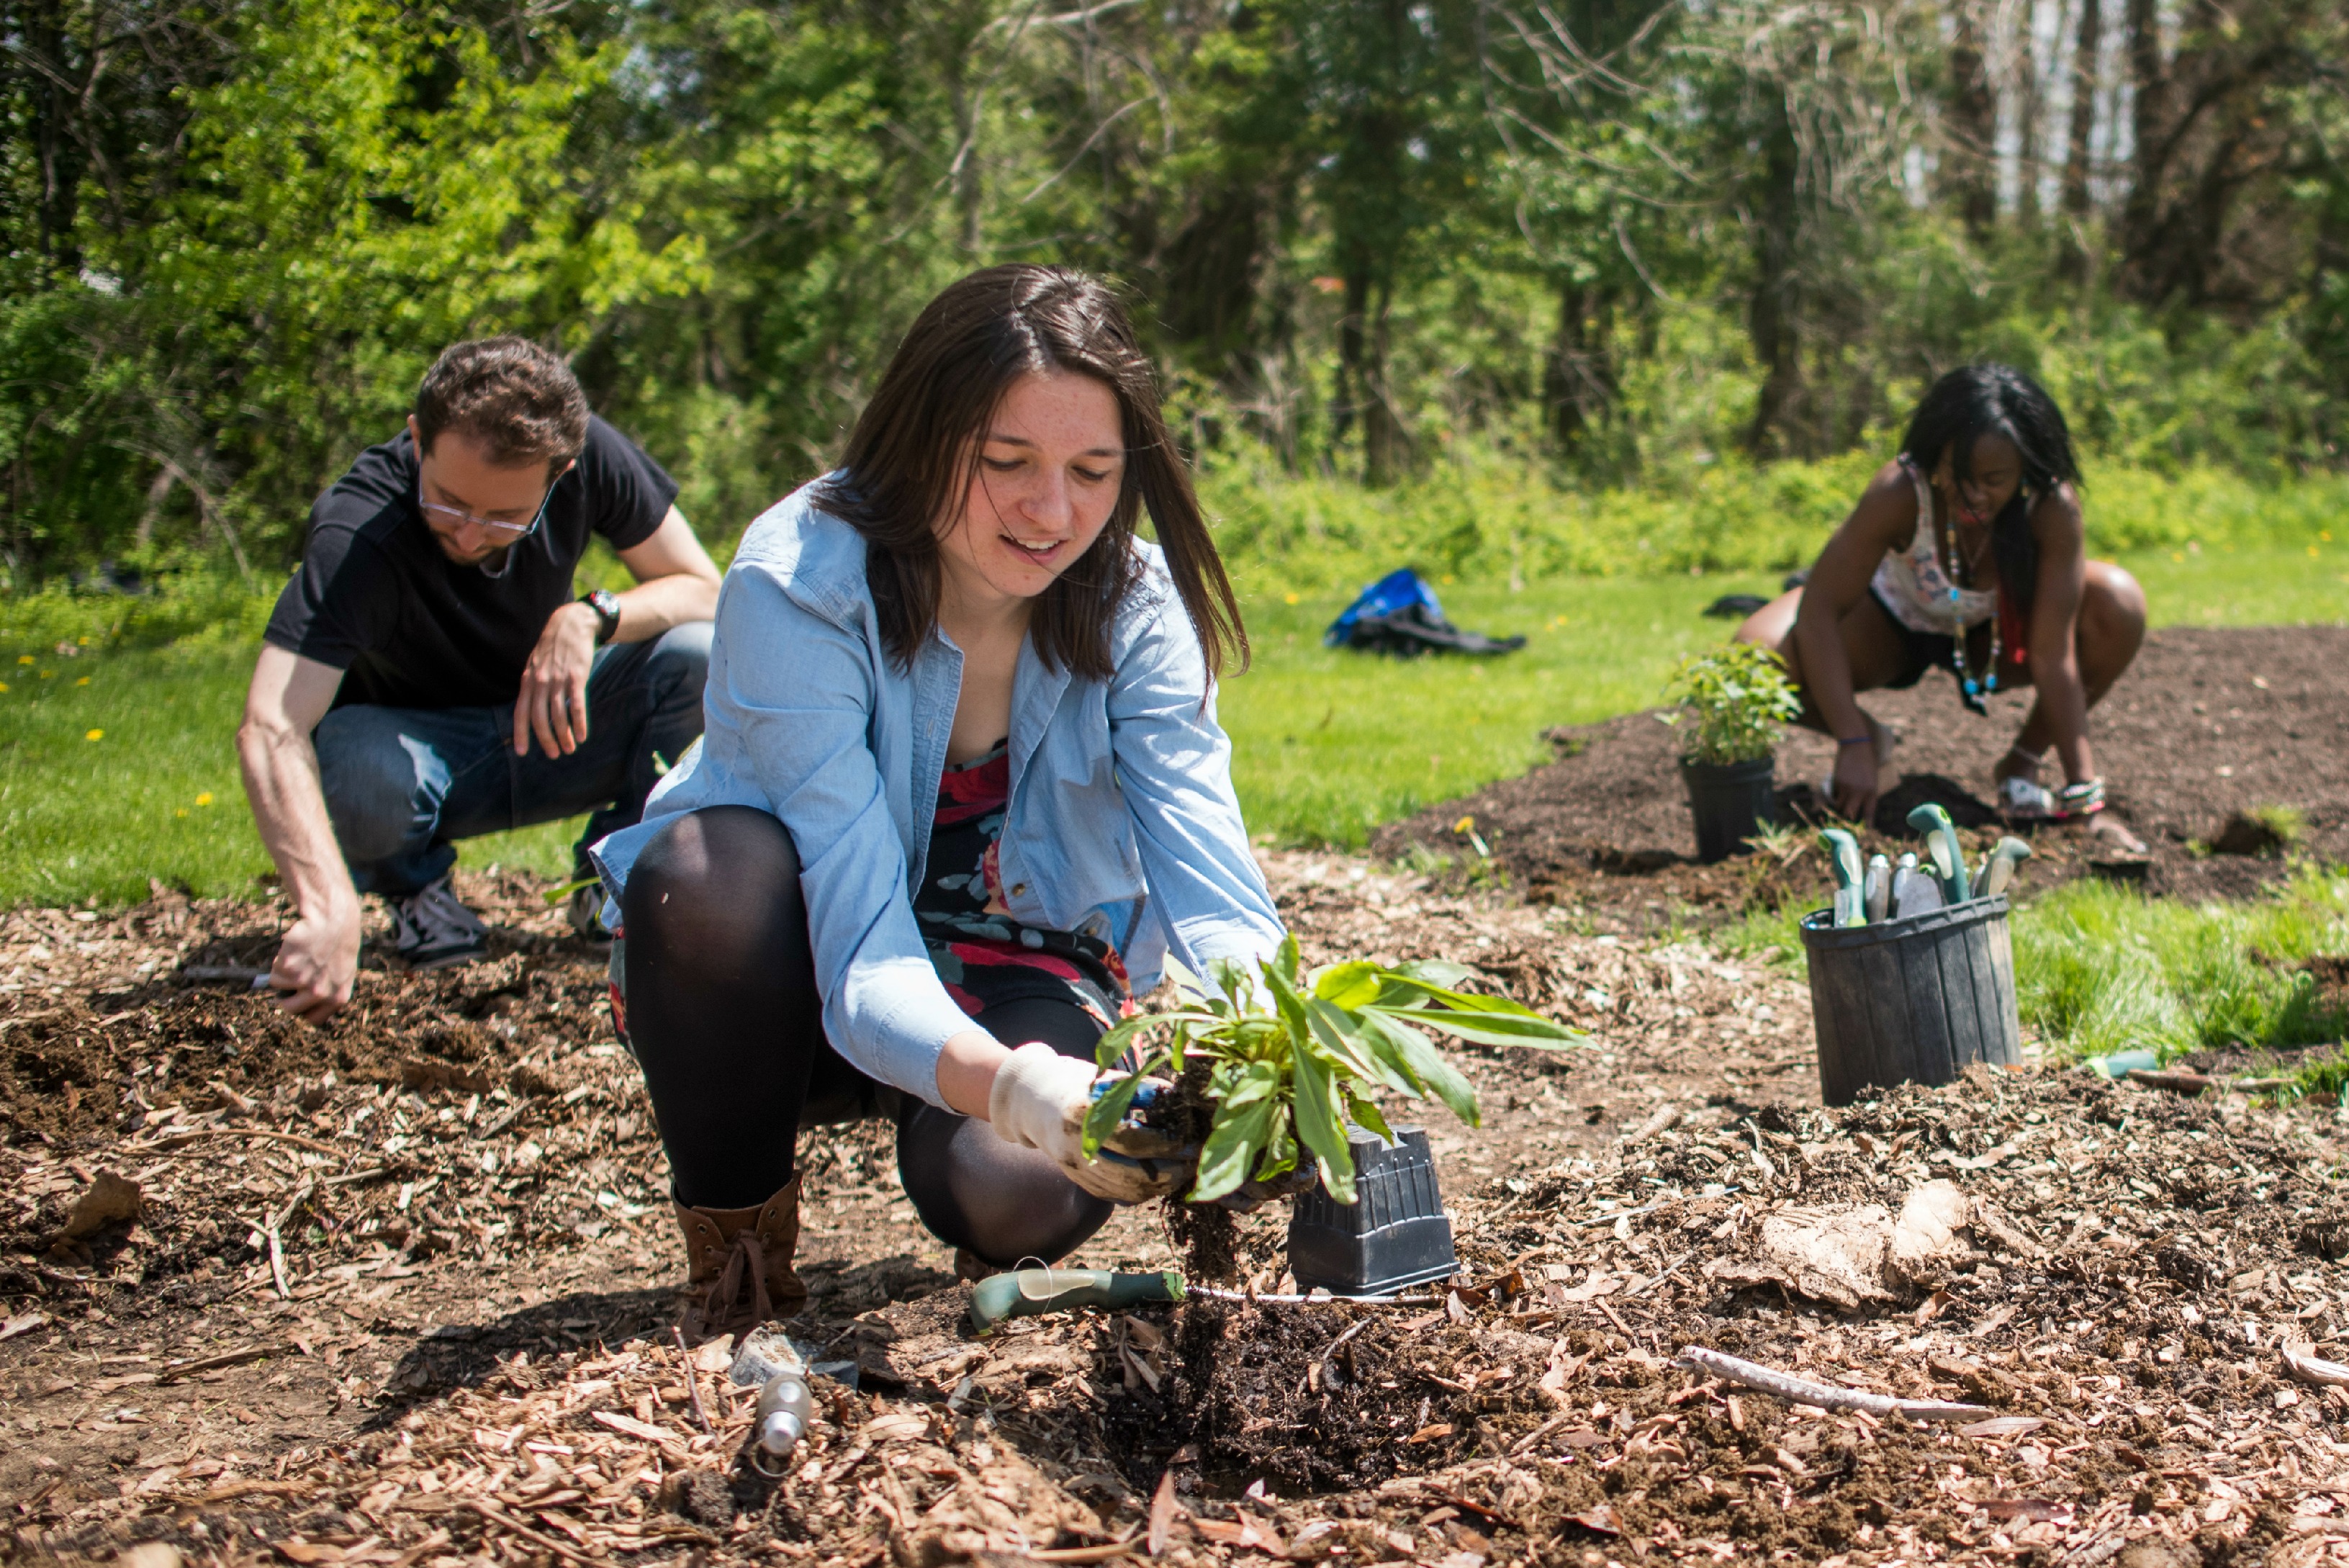 Students planting trees outdoors.